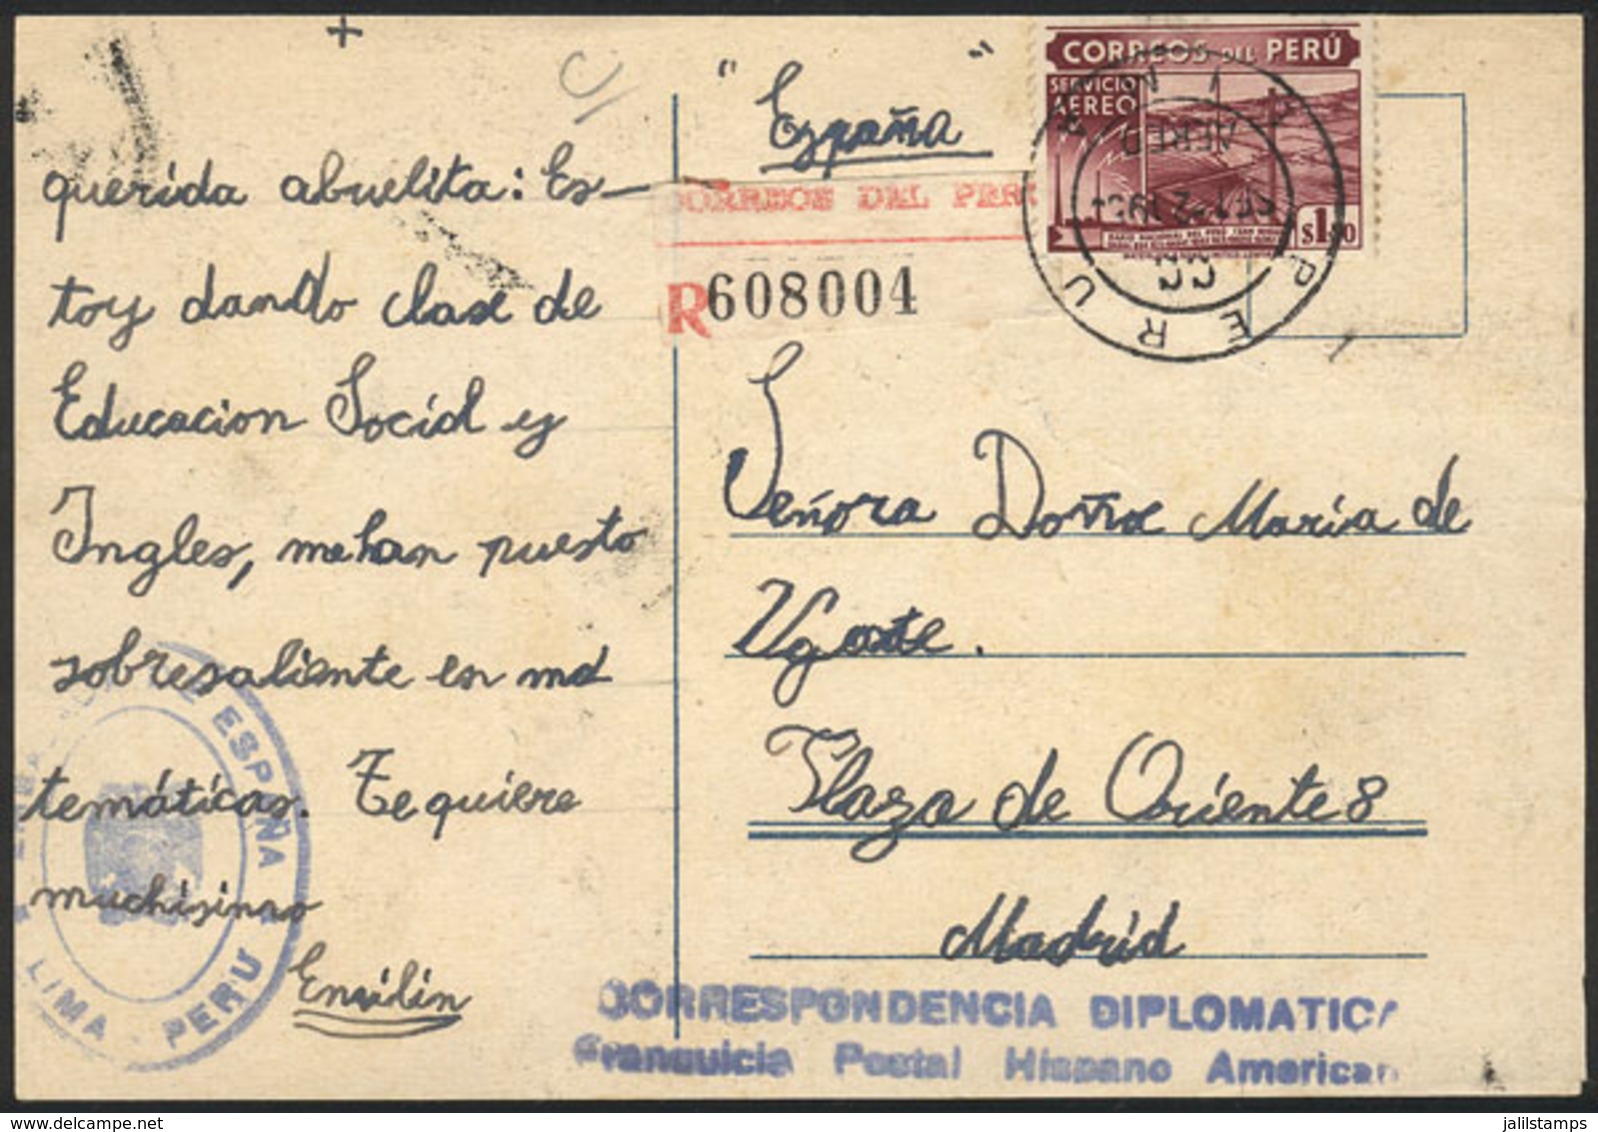 PERU: Postcard Sent From The Spanish Embassy In Lima To Madrid On 2/SE/1953, With Latin-American Postal Franchise For Di - Peru